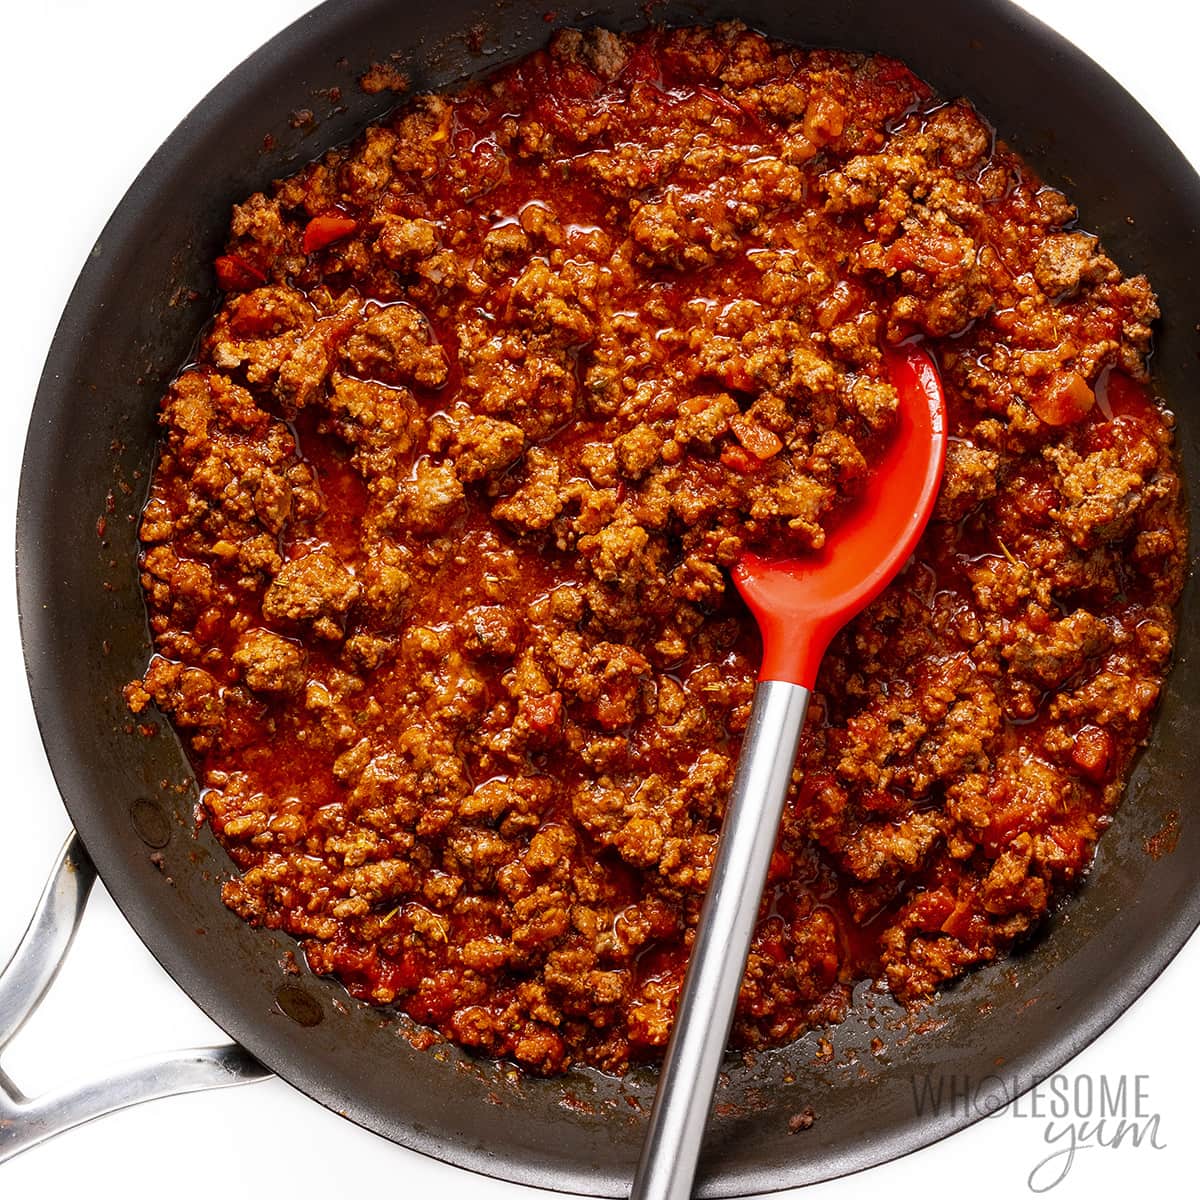 Meat sauce in a skillet with a spoon.